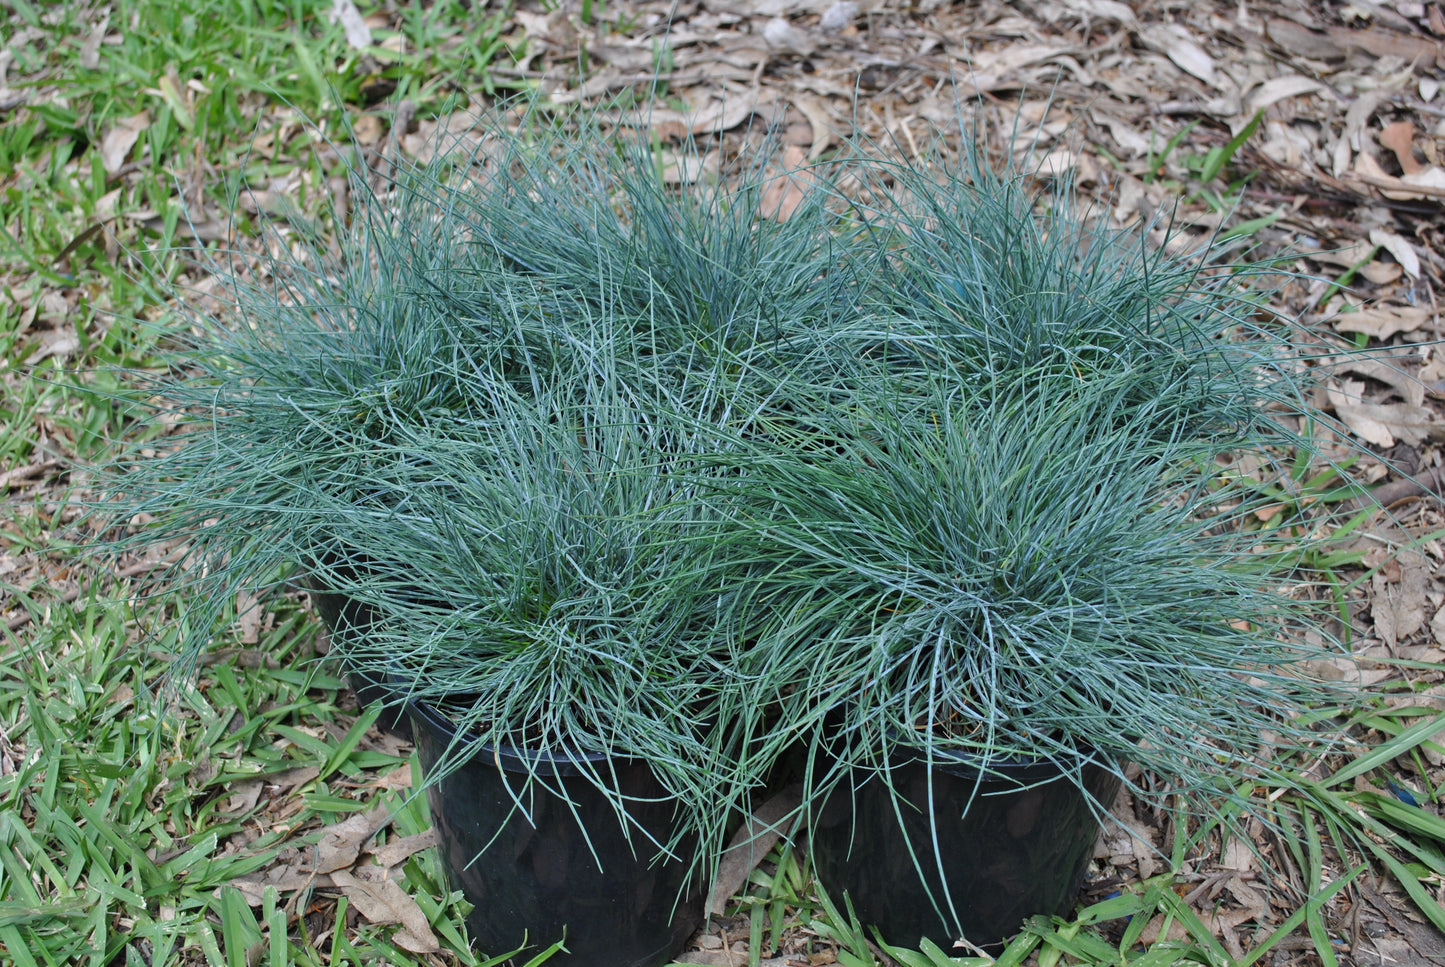 Lovely foliage on a group of Festuca glauca 'Blue Fescue' in black pots